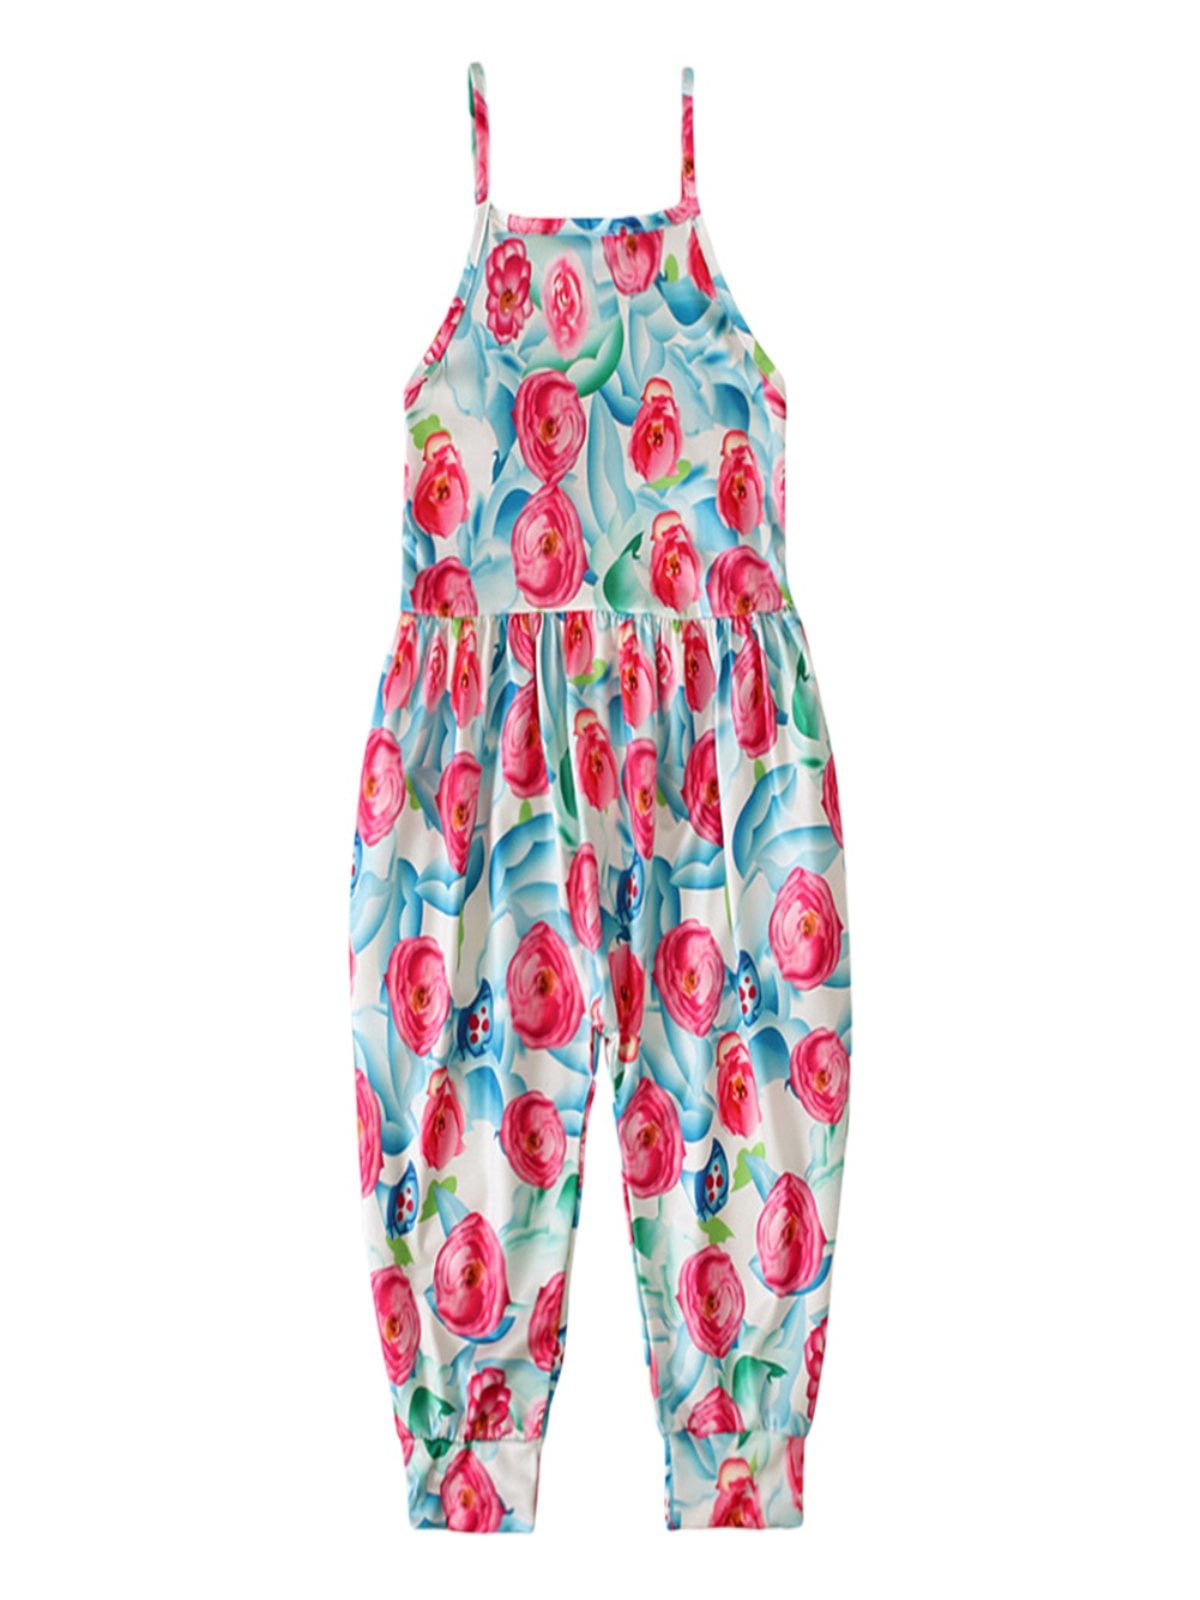 Details about   Summer Baby Girls Flowers Print Rompers Sling Sleeveless Cotton Jumpsuit New 